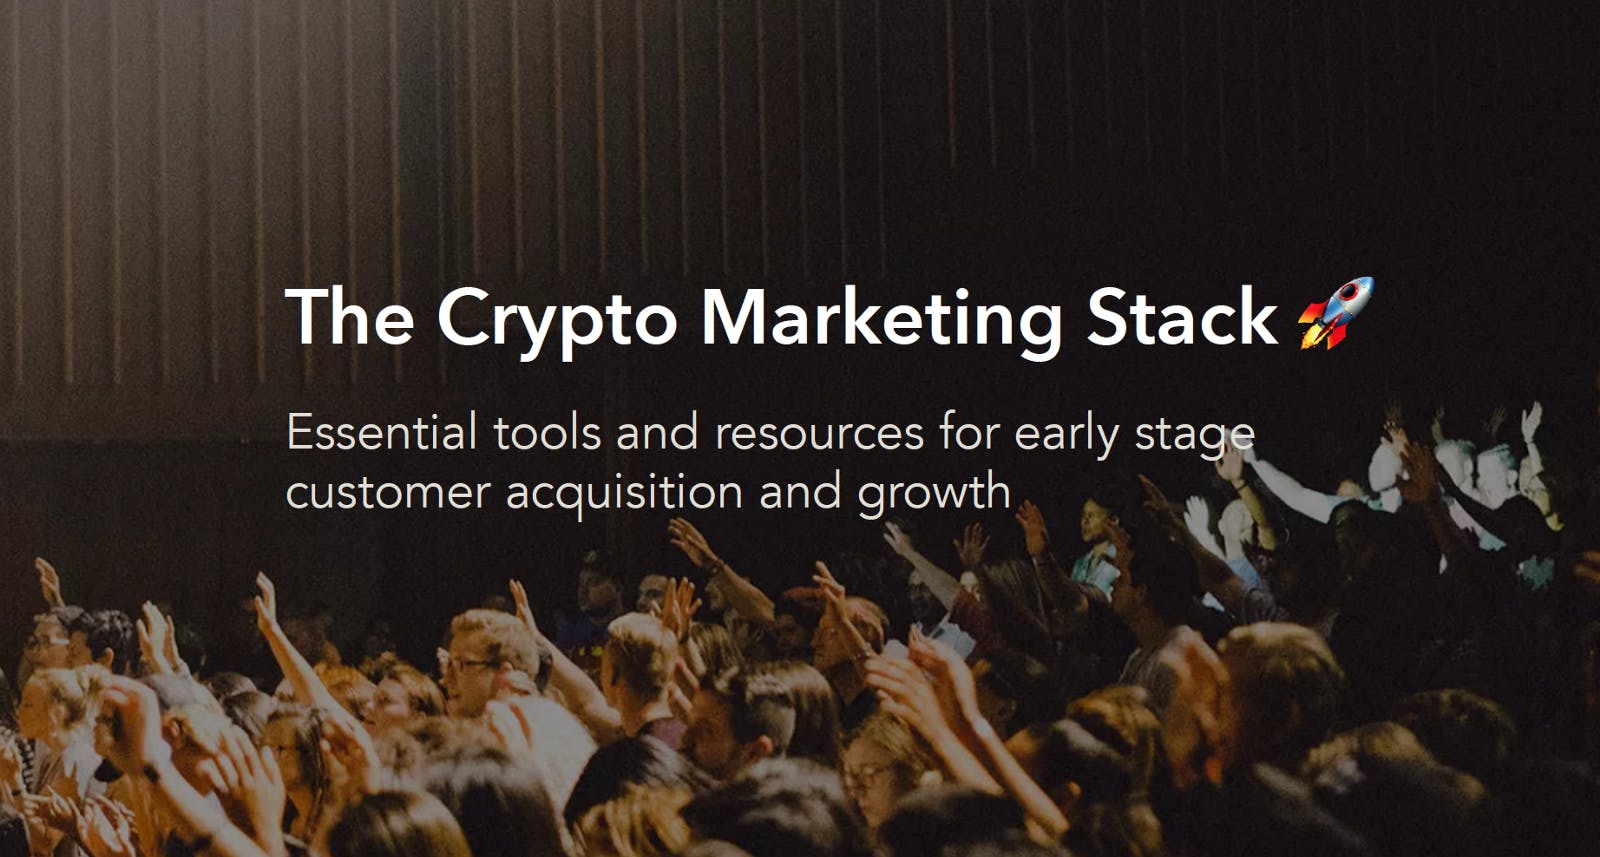 /the-crypto-marketing-stack-2a0d4898c41c feature image